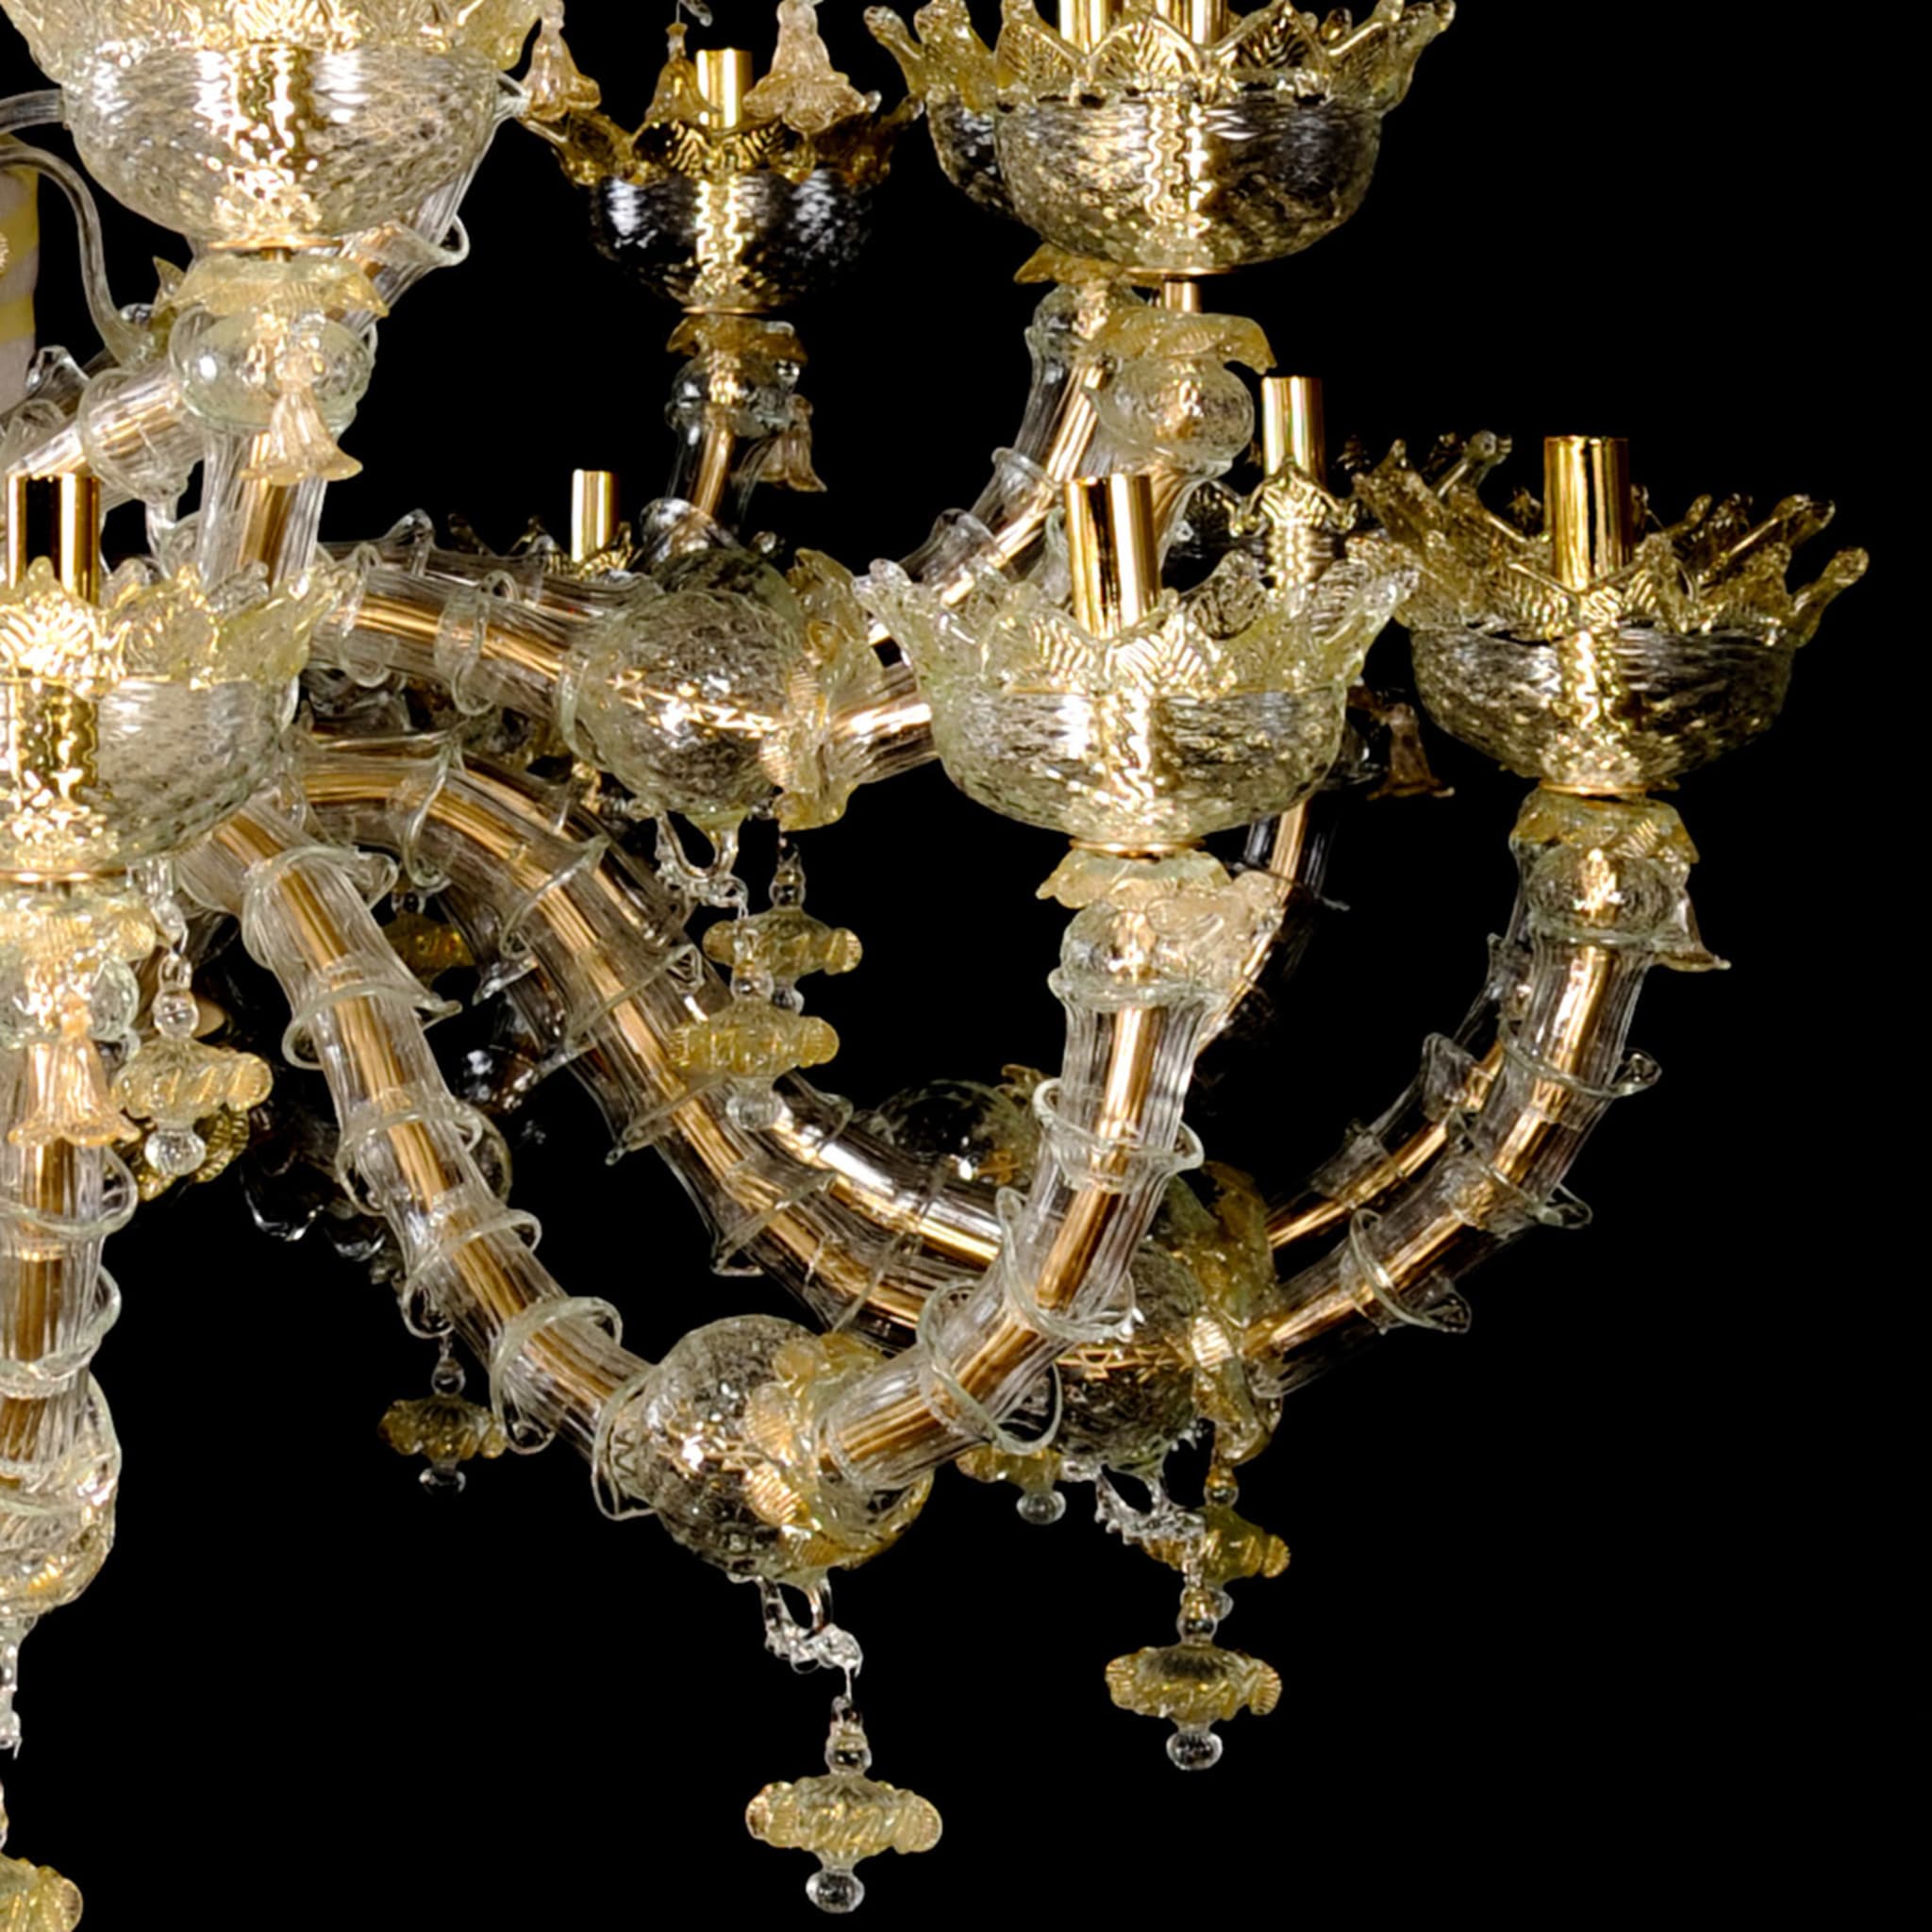 Rezzonico-style Gold and Crystal Chandelier #6 - Alternative view 1